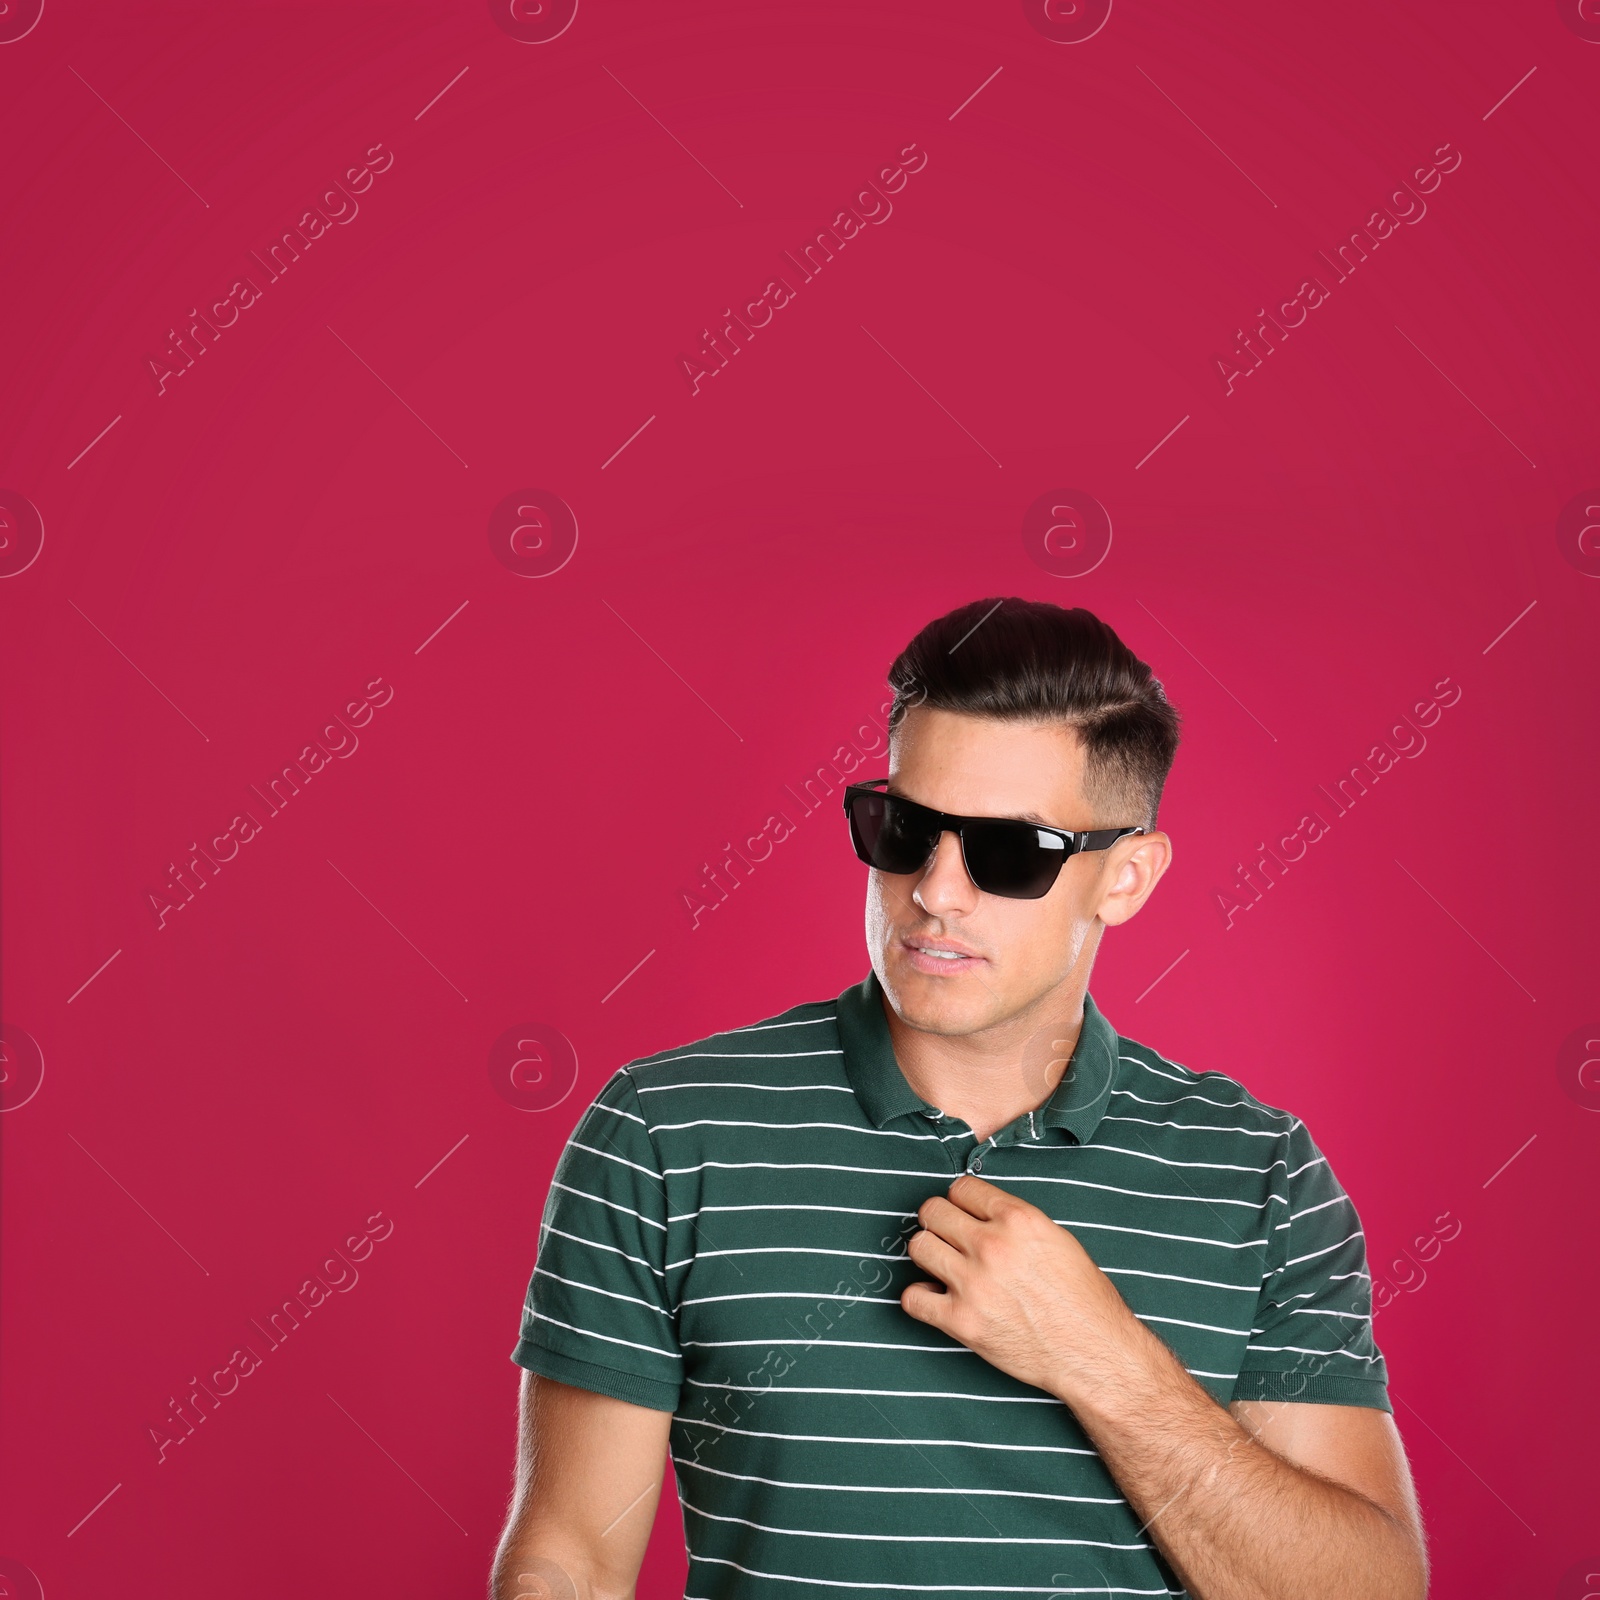 Photo of Handsome man wearing sunglasses on pink background